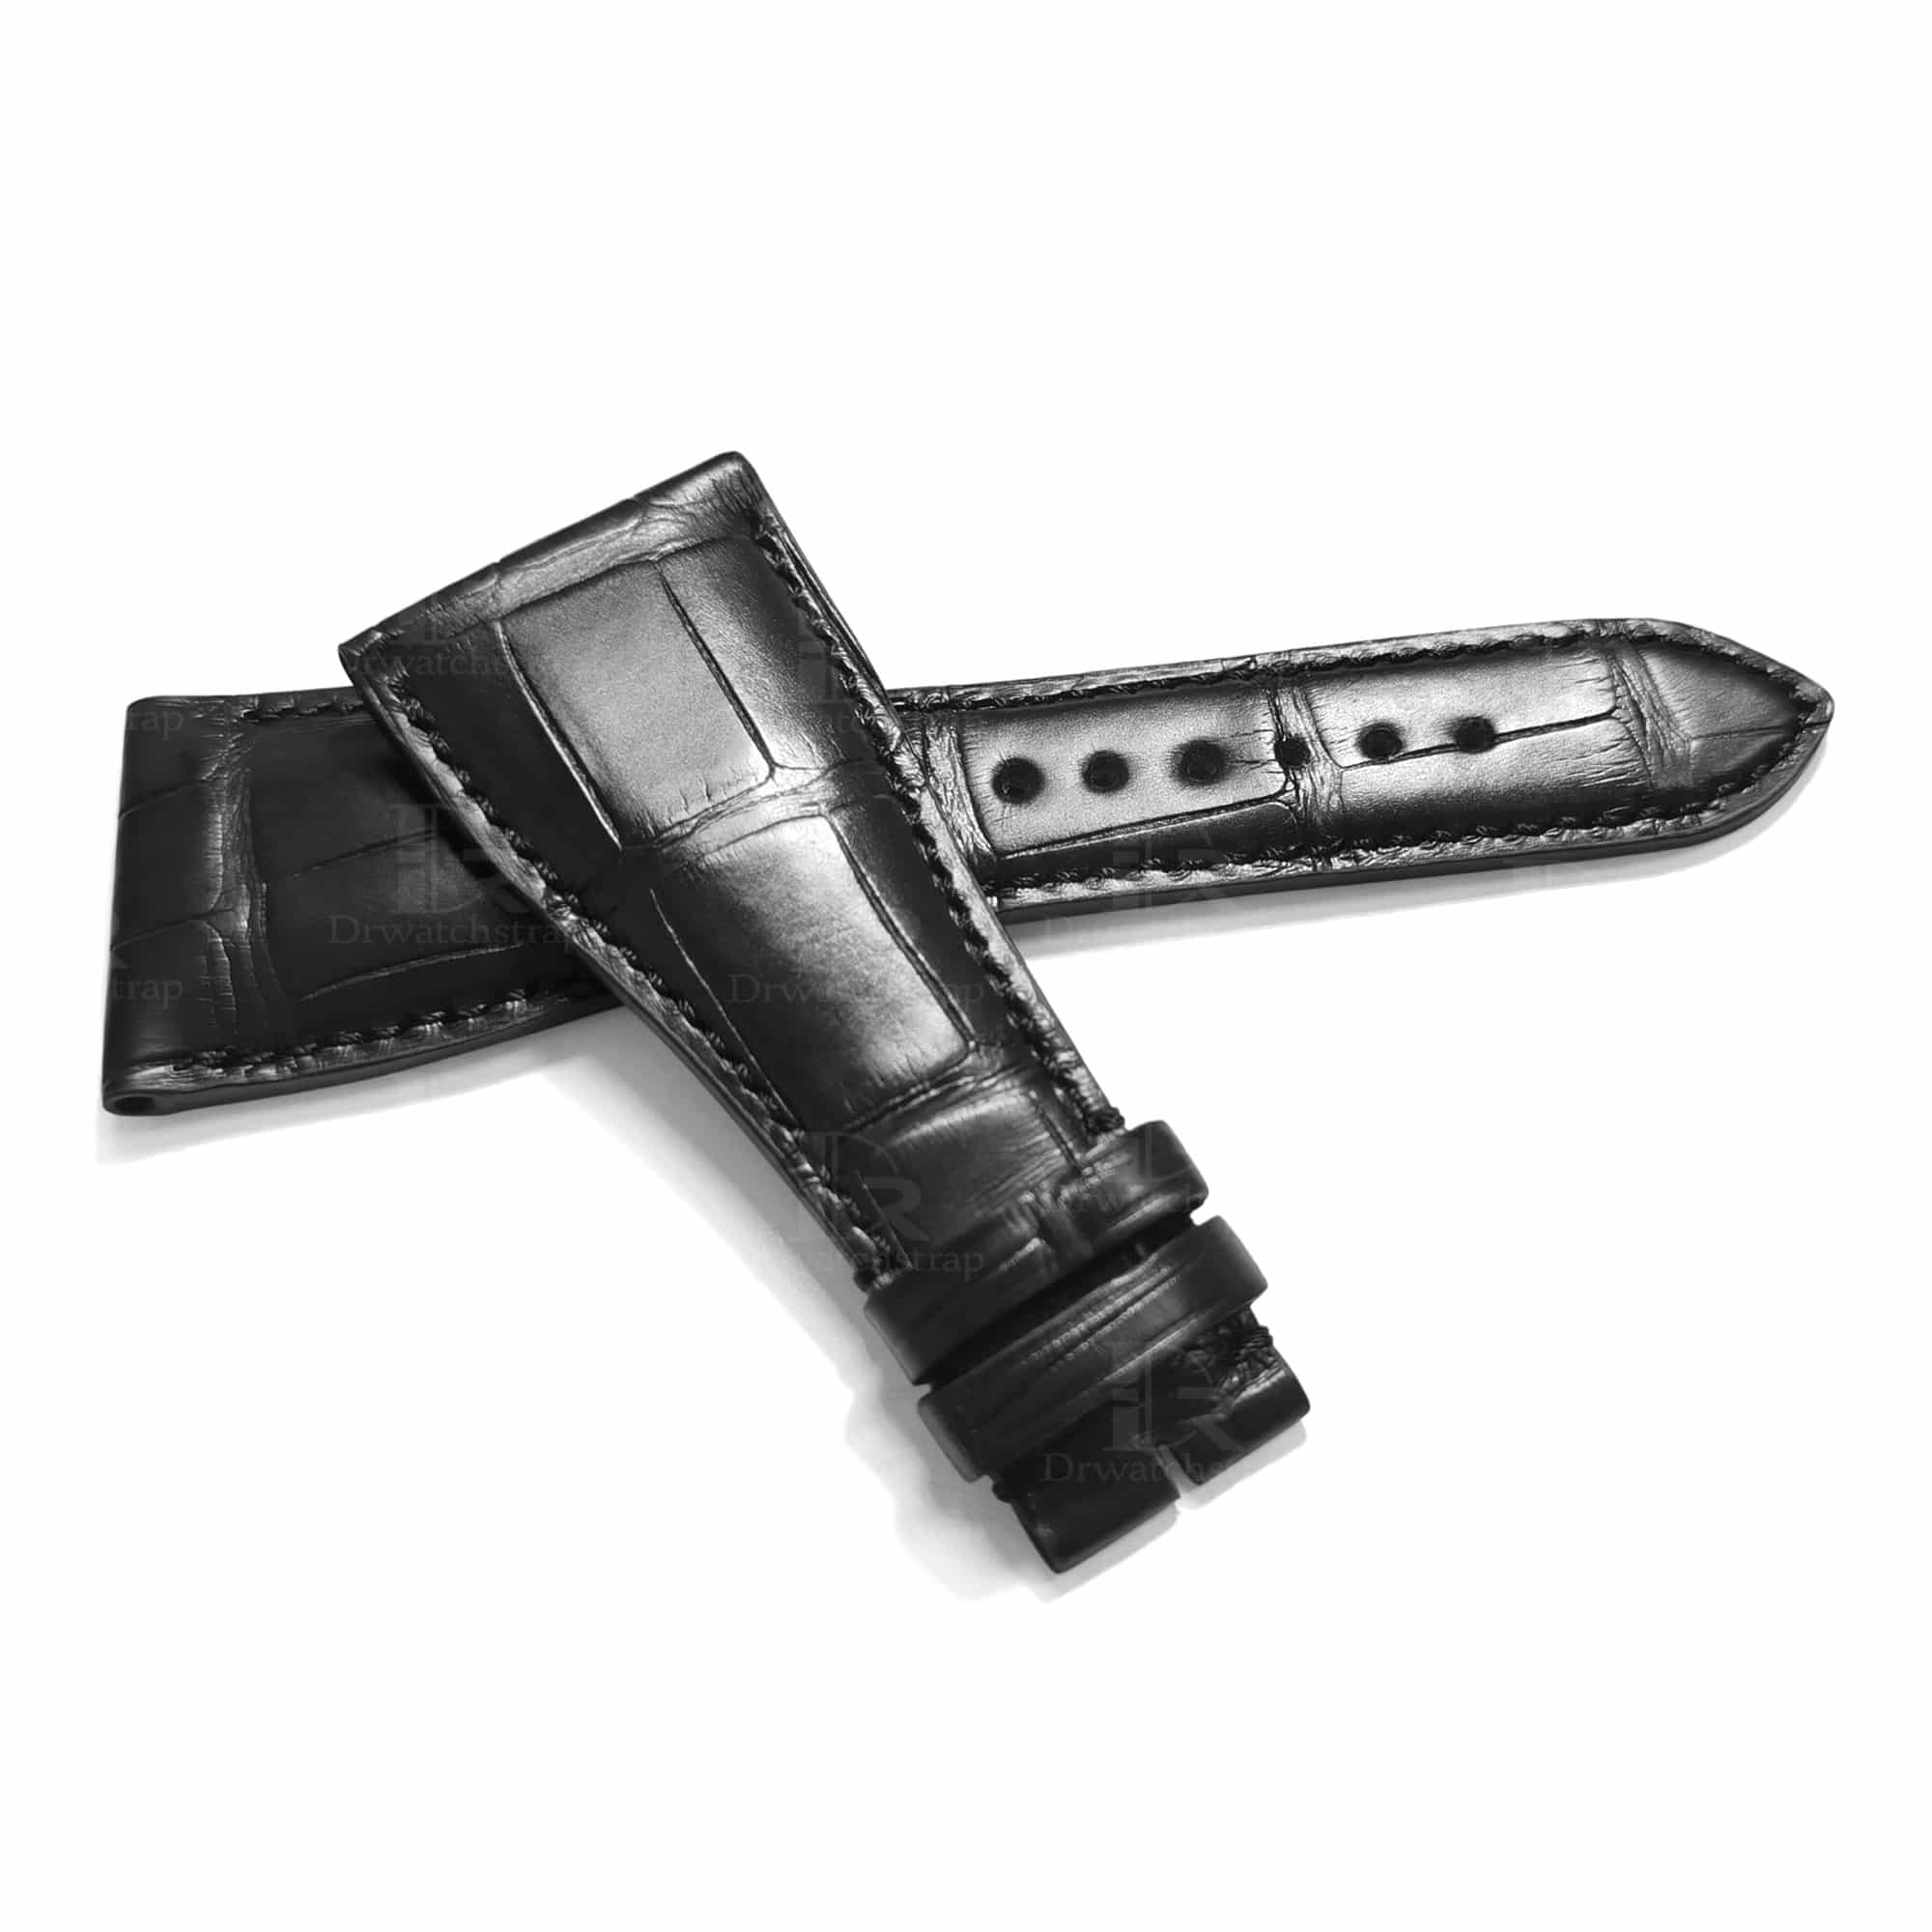 Roger Dubuis watch straps for sale, Replacement Black American Alligator Leather strap for Roger Dubuis Golden Square watch, Handmade OEM lug size 30mm